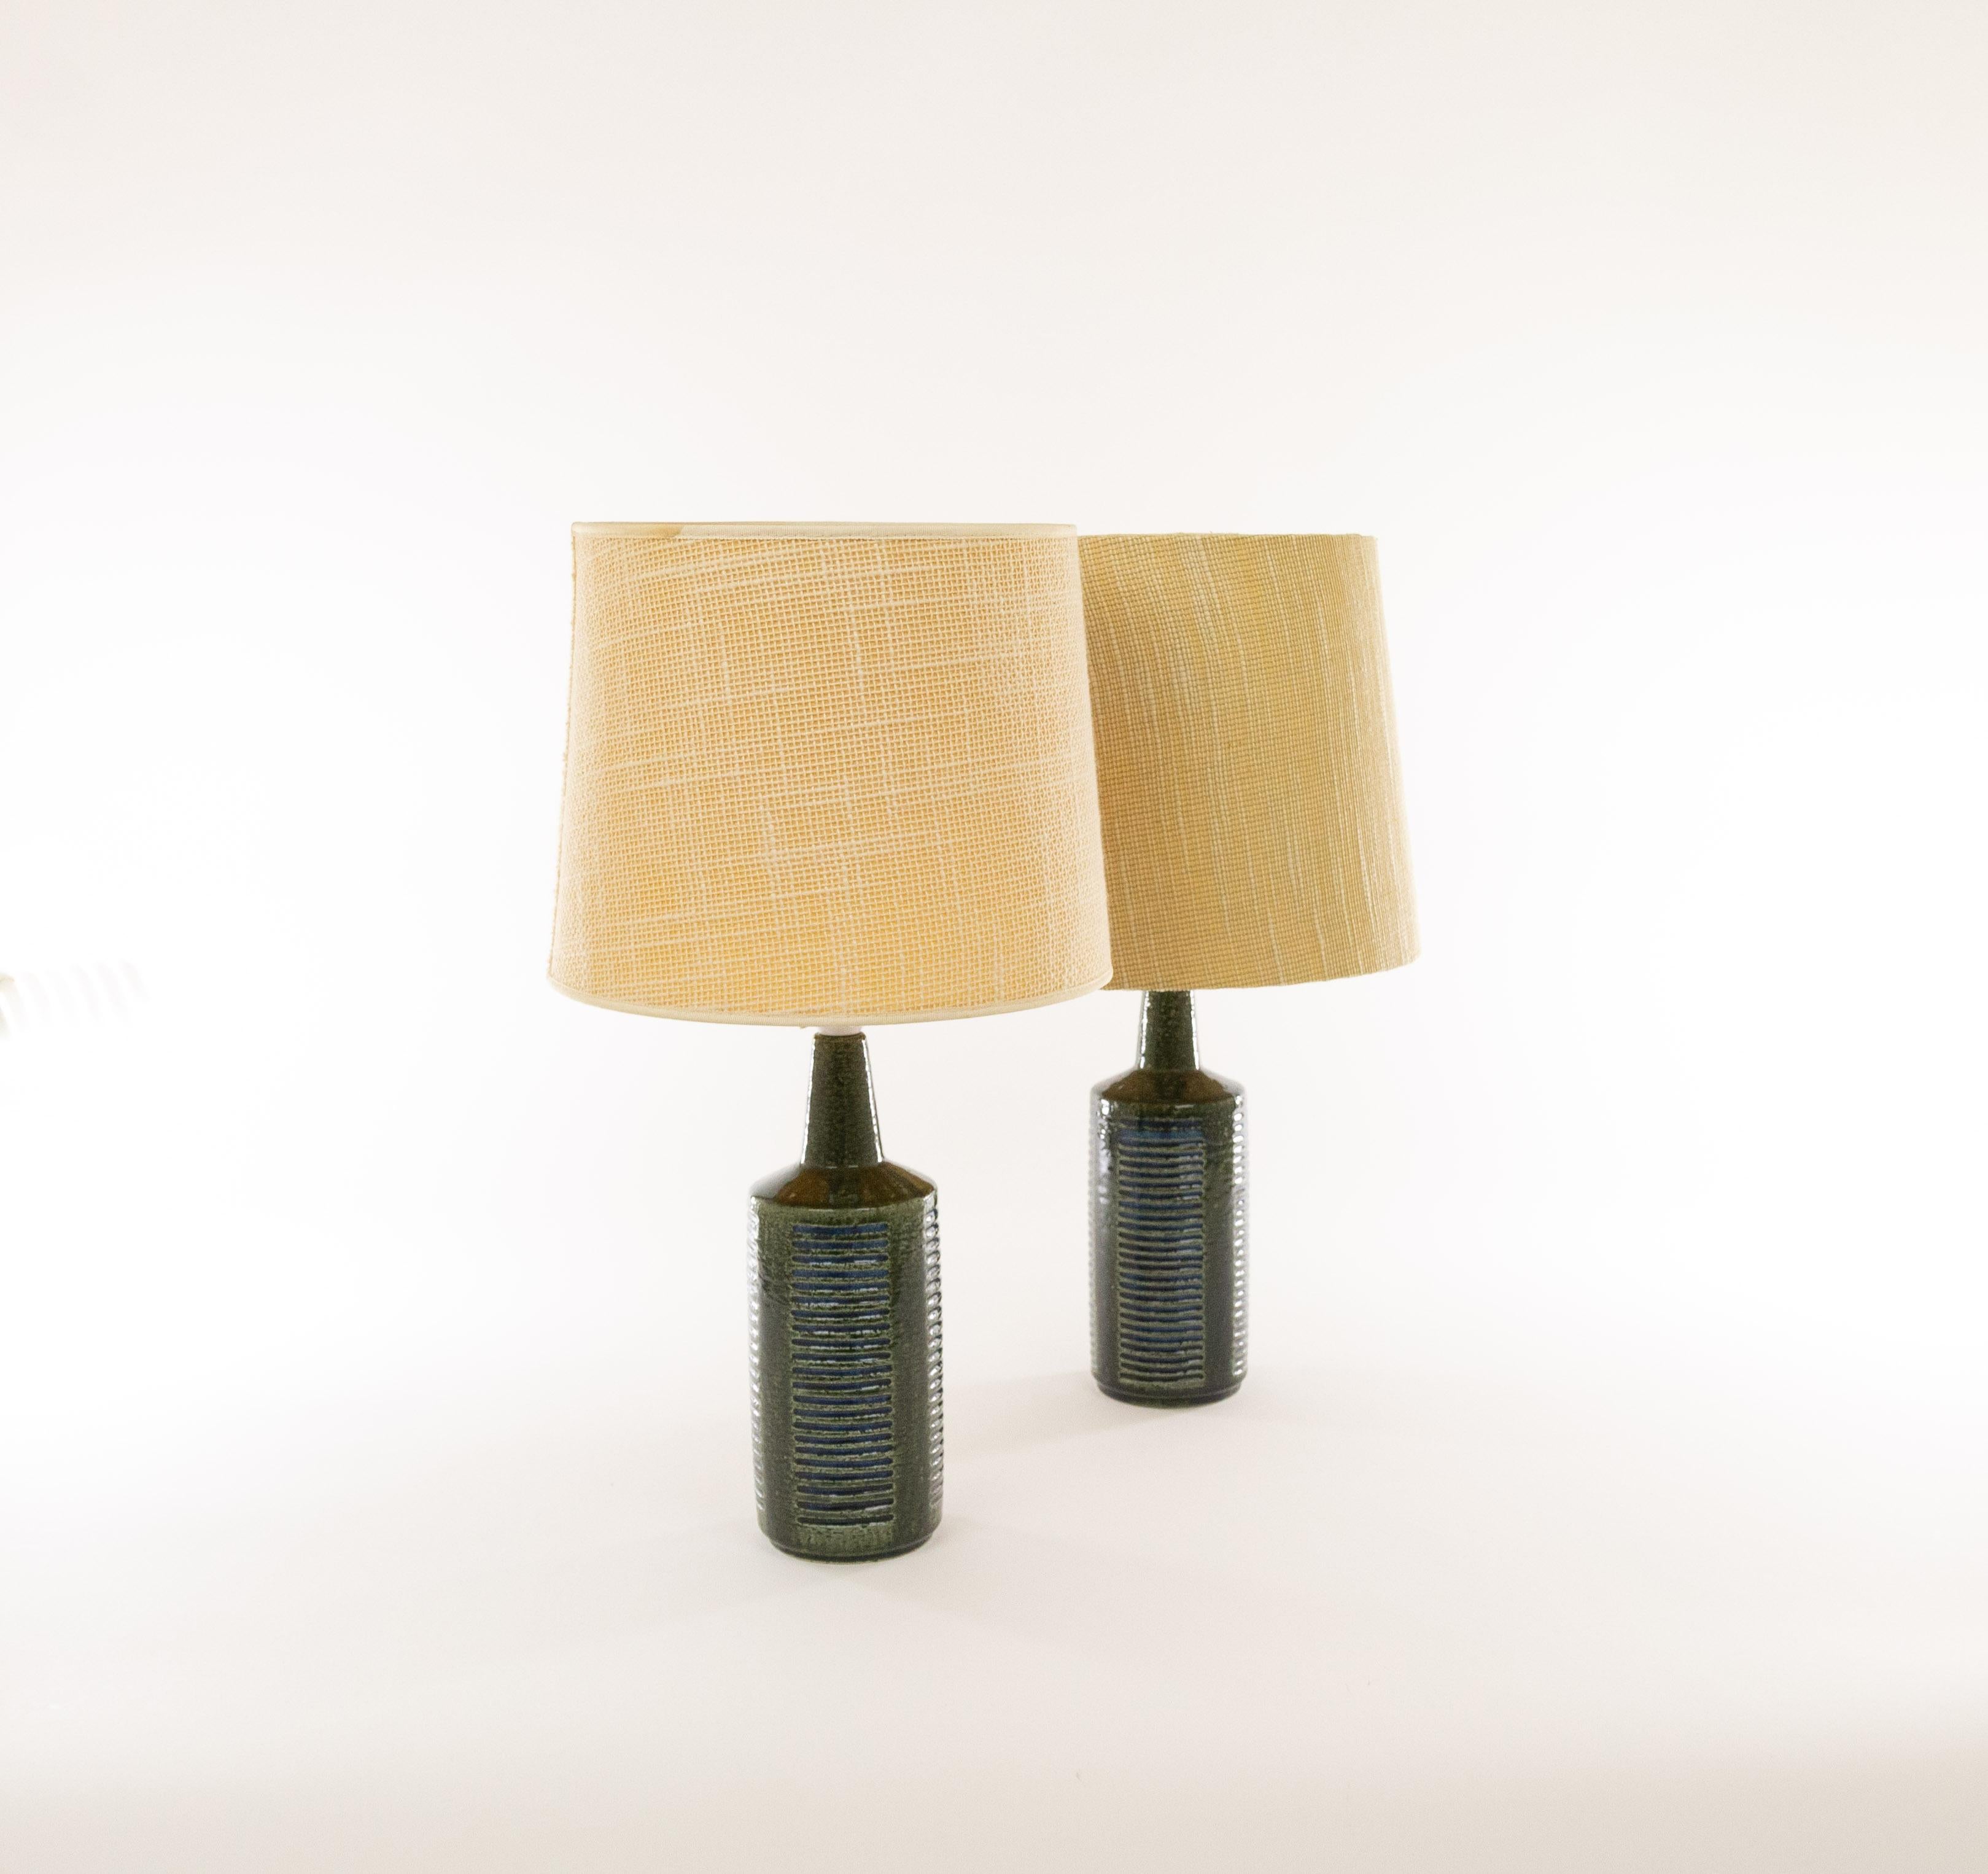 A pair of DL/30 table lamps made by Annelise and Per Linnemann-Schmidt for Palshus in the 1960s. The color of both pieces is dark olive Green with Blue. Although both pieces are very similar, they are not exactly the same. There are small